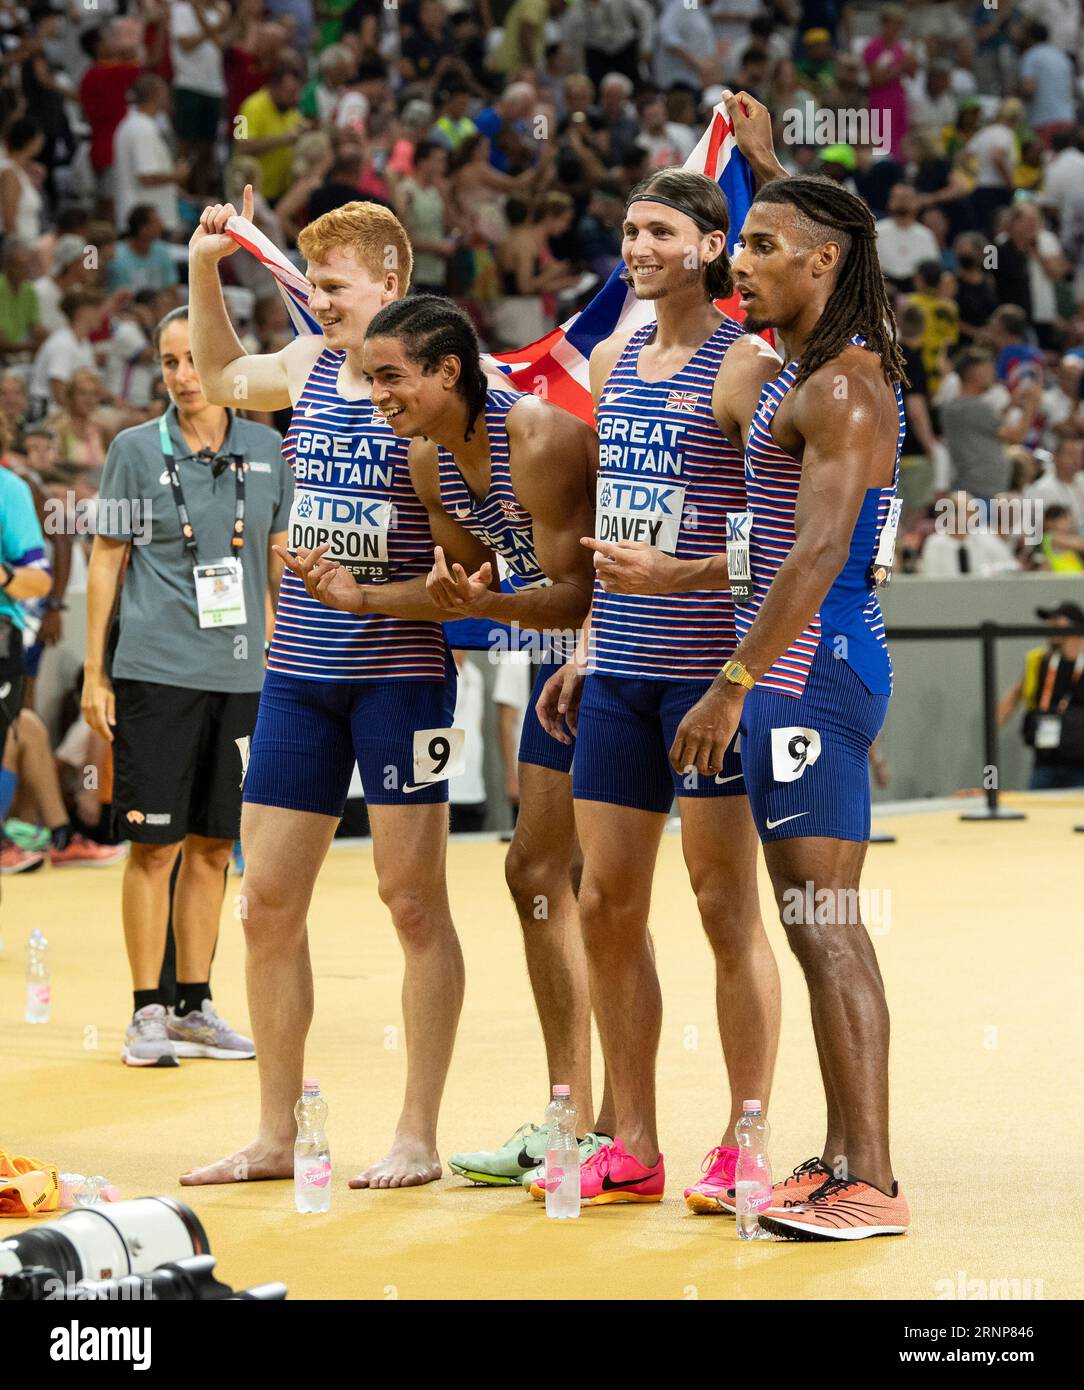 Charles Dobson, Rio Mitcham, Lewis Davey and Alex Haydock-Wilson of GB & NI competing in the men’s 4x400m relay final on day 9 of the World Athletics Stock Photo